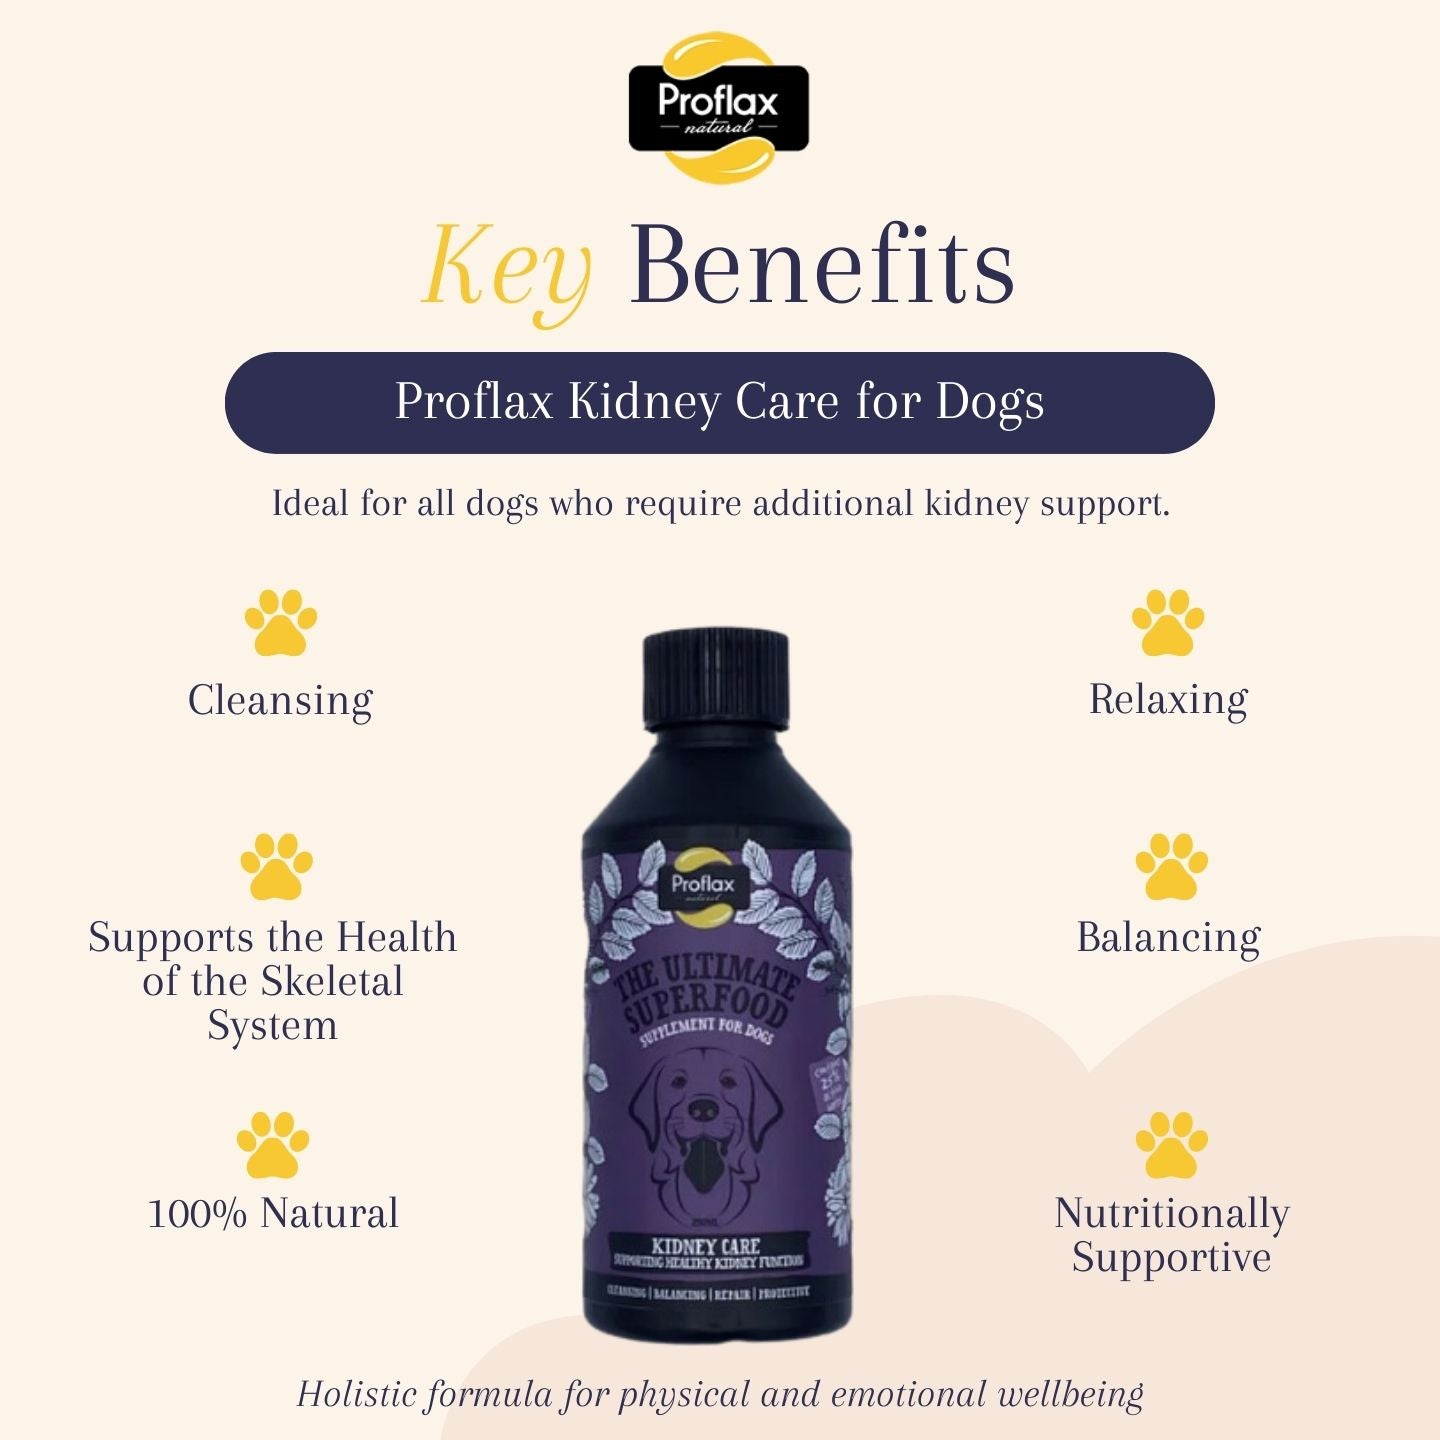 Proflax Kidney Care for Dogs